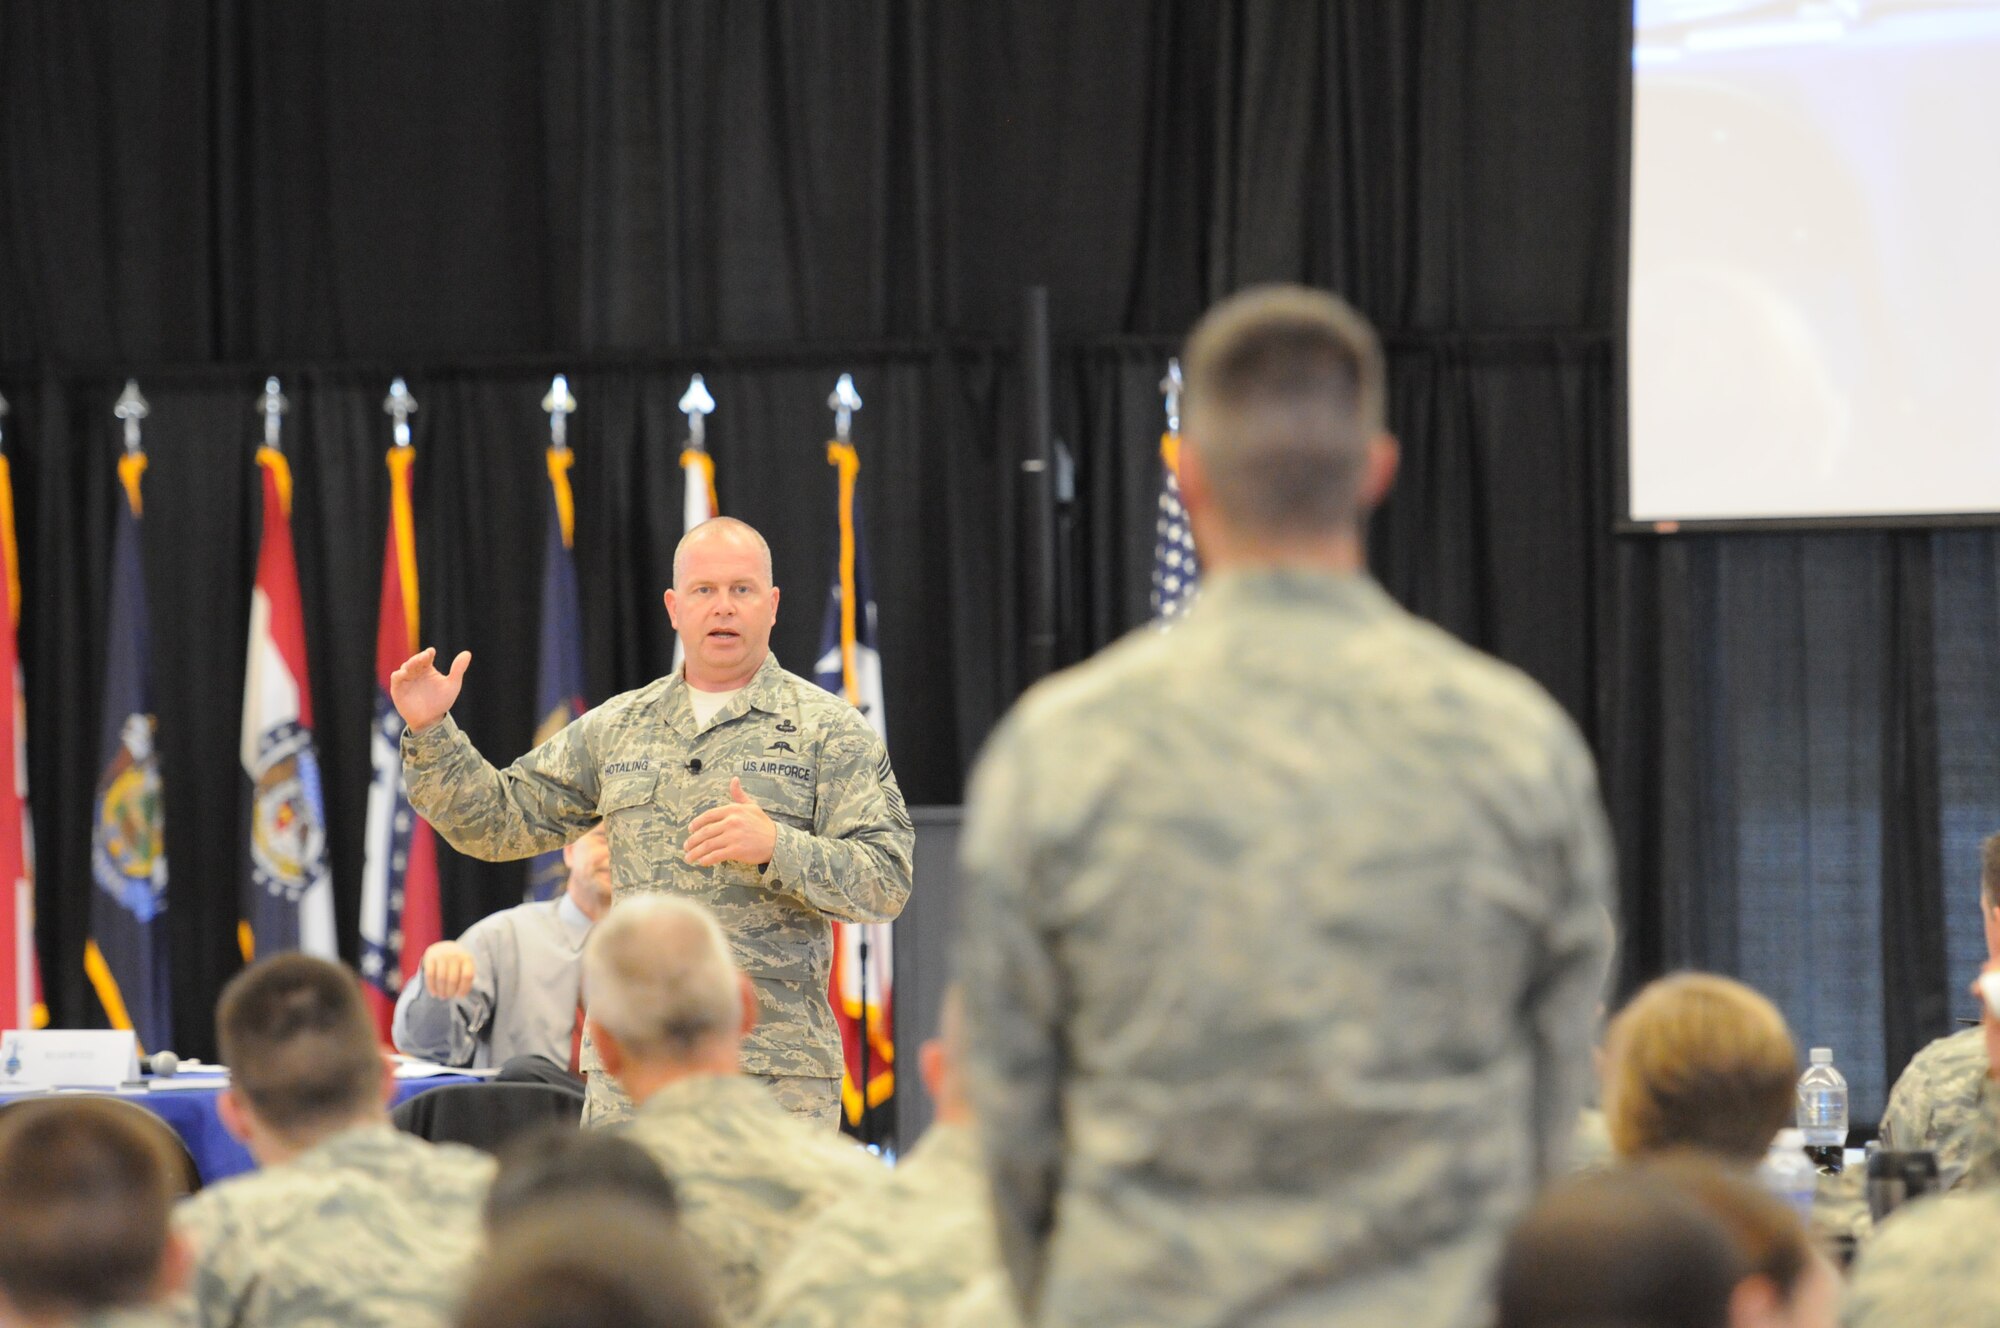 Chief Master Sgt. James W. Hotaling, command chief master sergeant of the Air National Guard, speaks at the Air National Guard’s Enlisted Leadership Symposium, at Camp Dawson, W. Va., Aug 18, 2015. ELS is designed for enlisted Airmen of all ranks to receive professional development that can be used to better enhance Airmen’s careers. (U.S. Air National Guard photo by Master Sgt. David Eichaker/released)